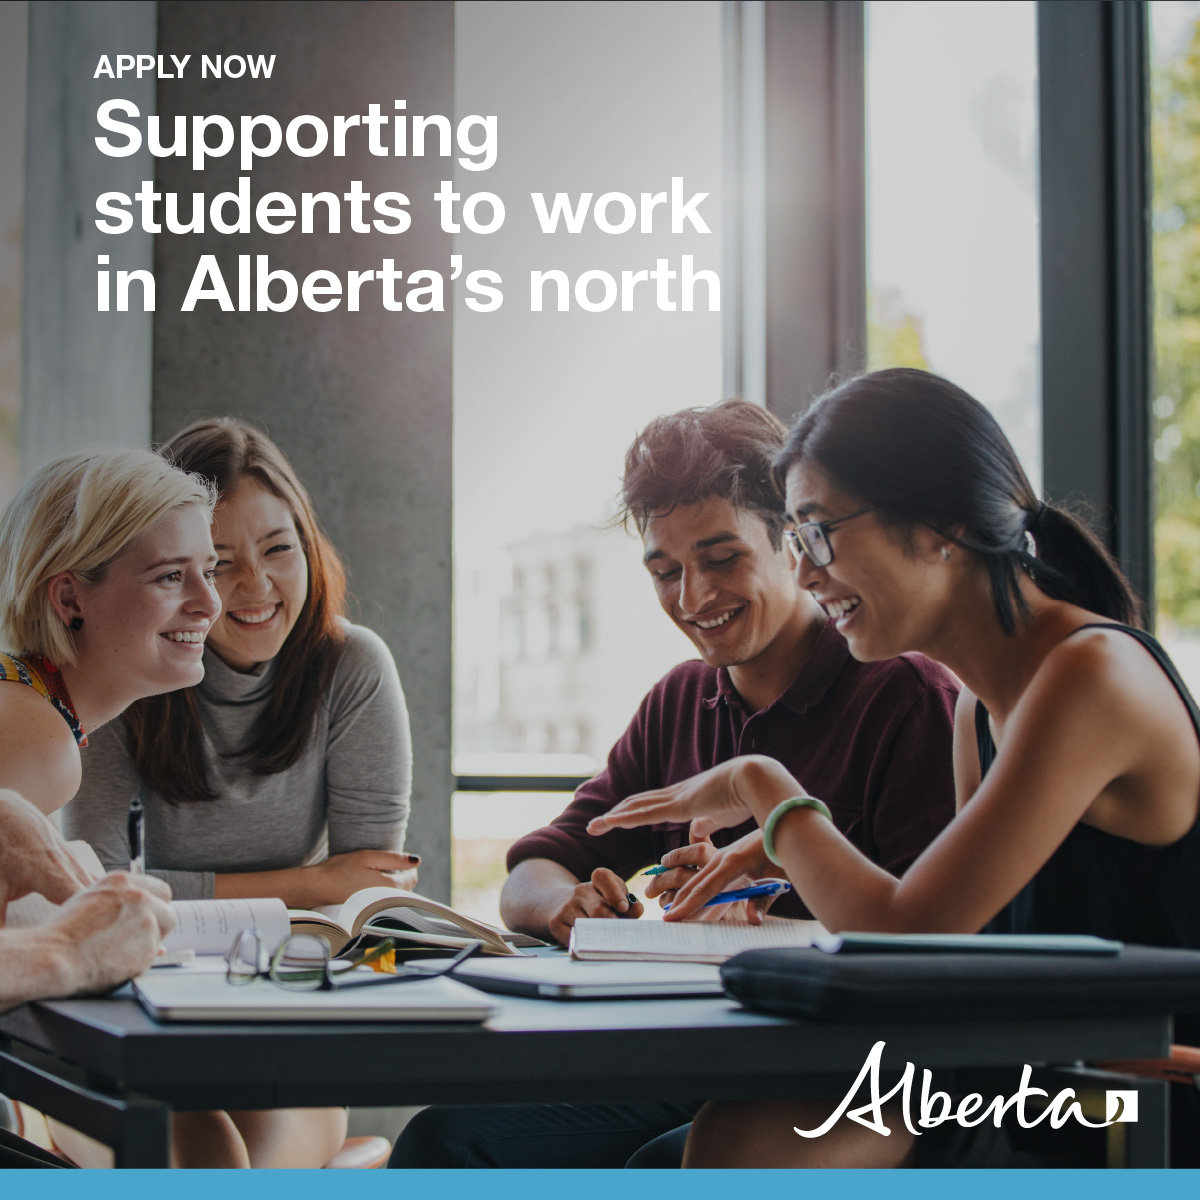 As part of #abbudget, we are investing nearly $1.9M in the Northern Alberta Development Council (NADC) Bursary program to help northern Alberta students train in high-demand professions that will help grow and diversify Alberta’s economy. Learn more: alberta.ca/release.cfm?xI… (1/2)